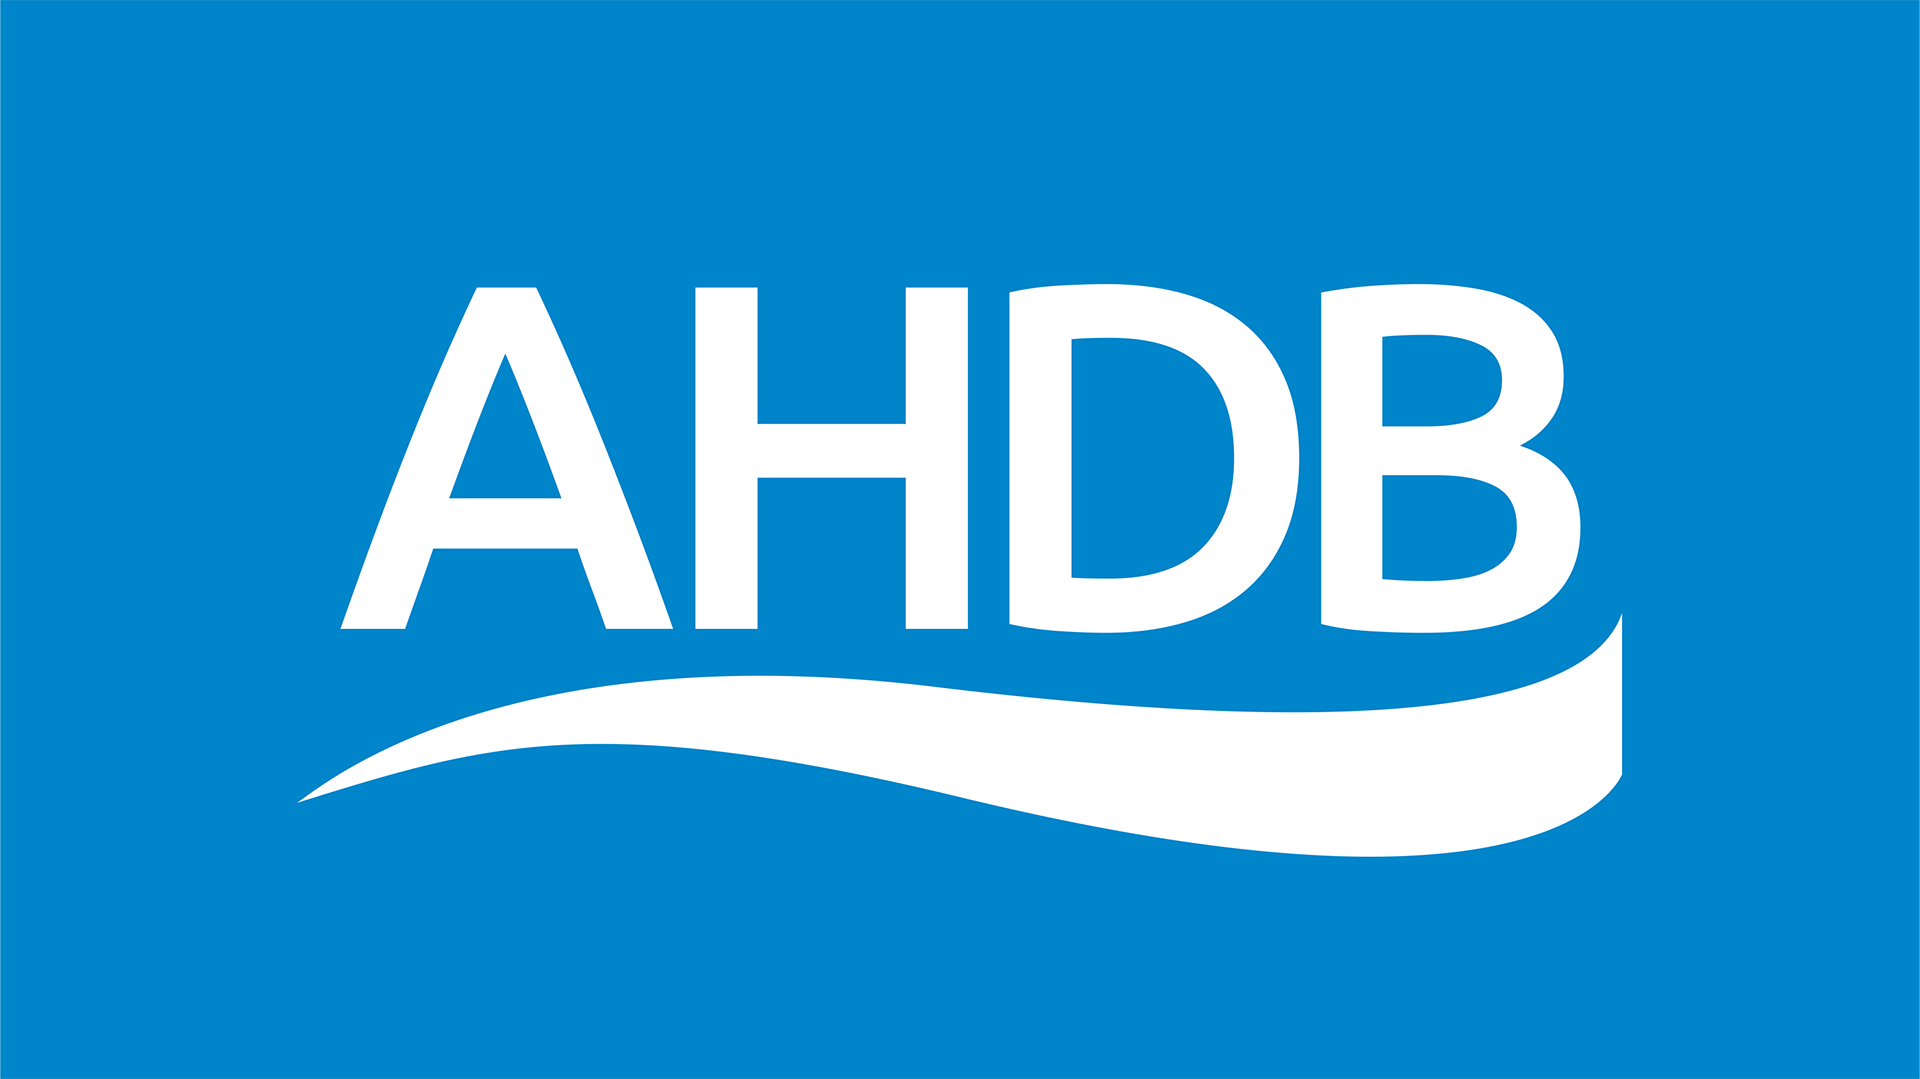 AHDB logo white letters blue background